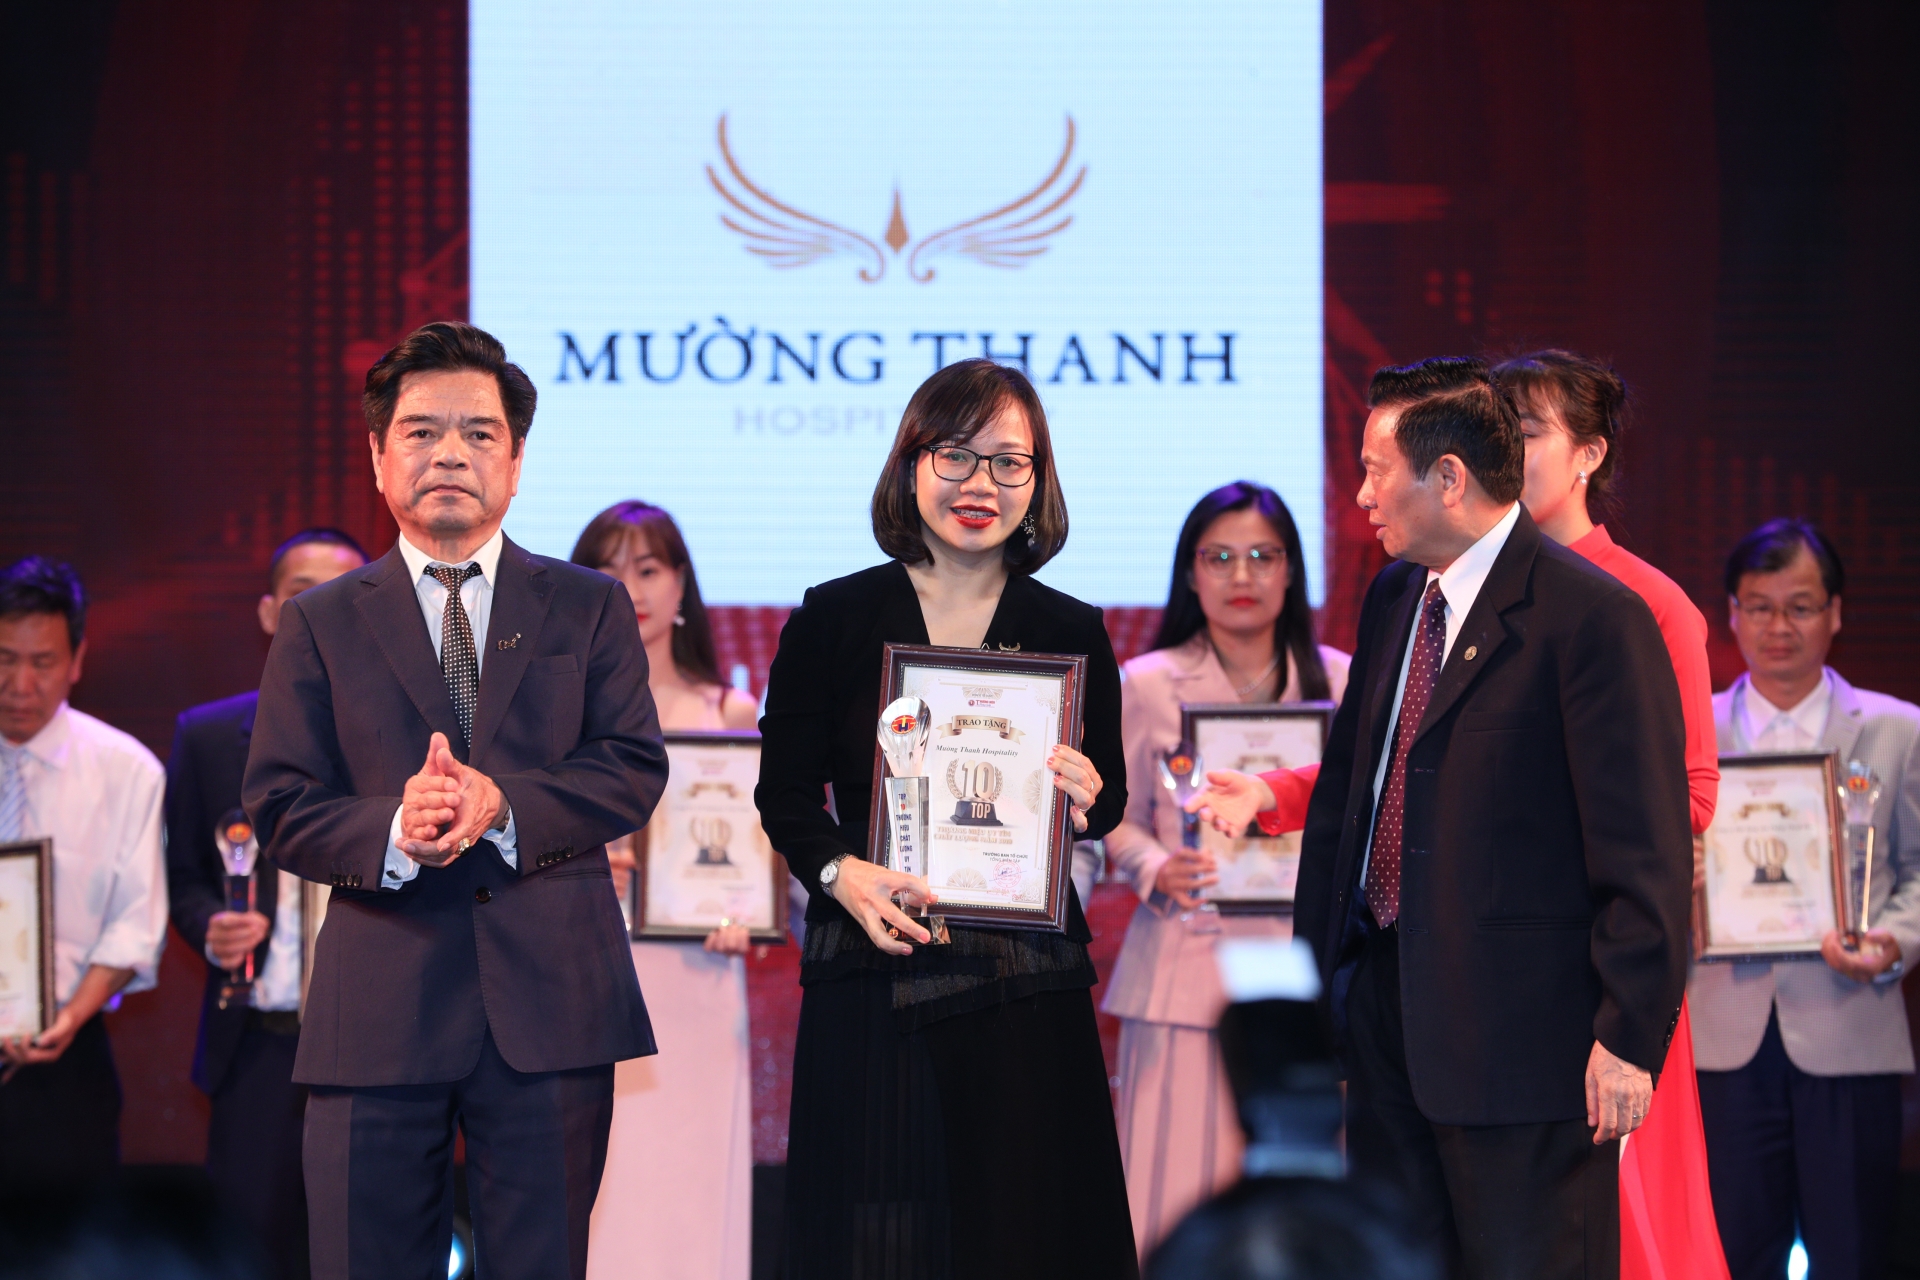 Muong Thanh among top 10 most prestigious and highest-quality brands